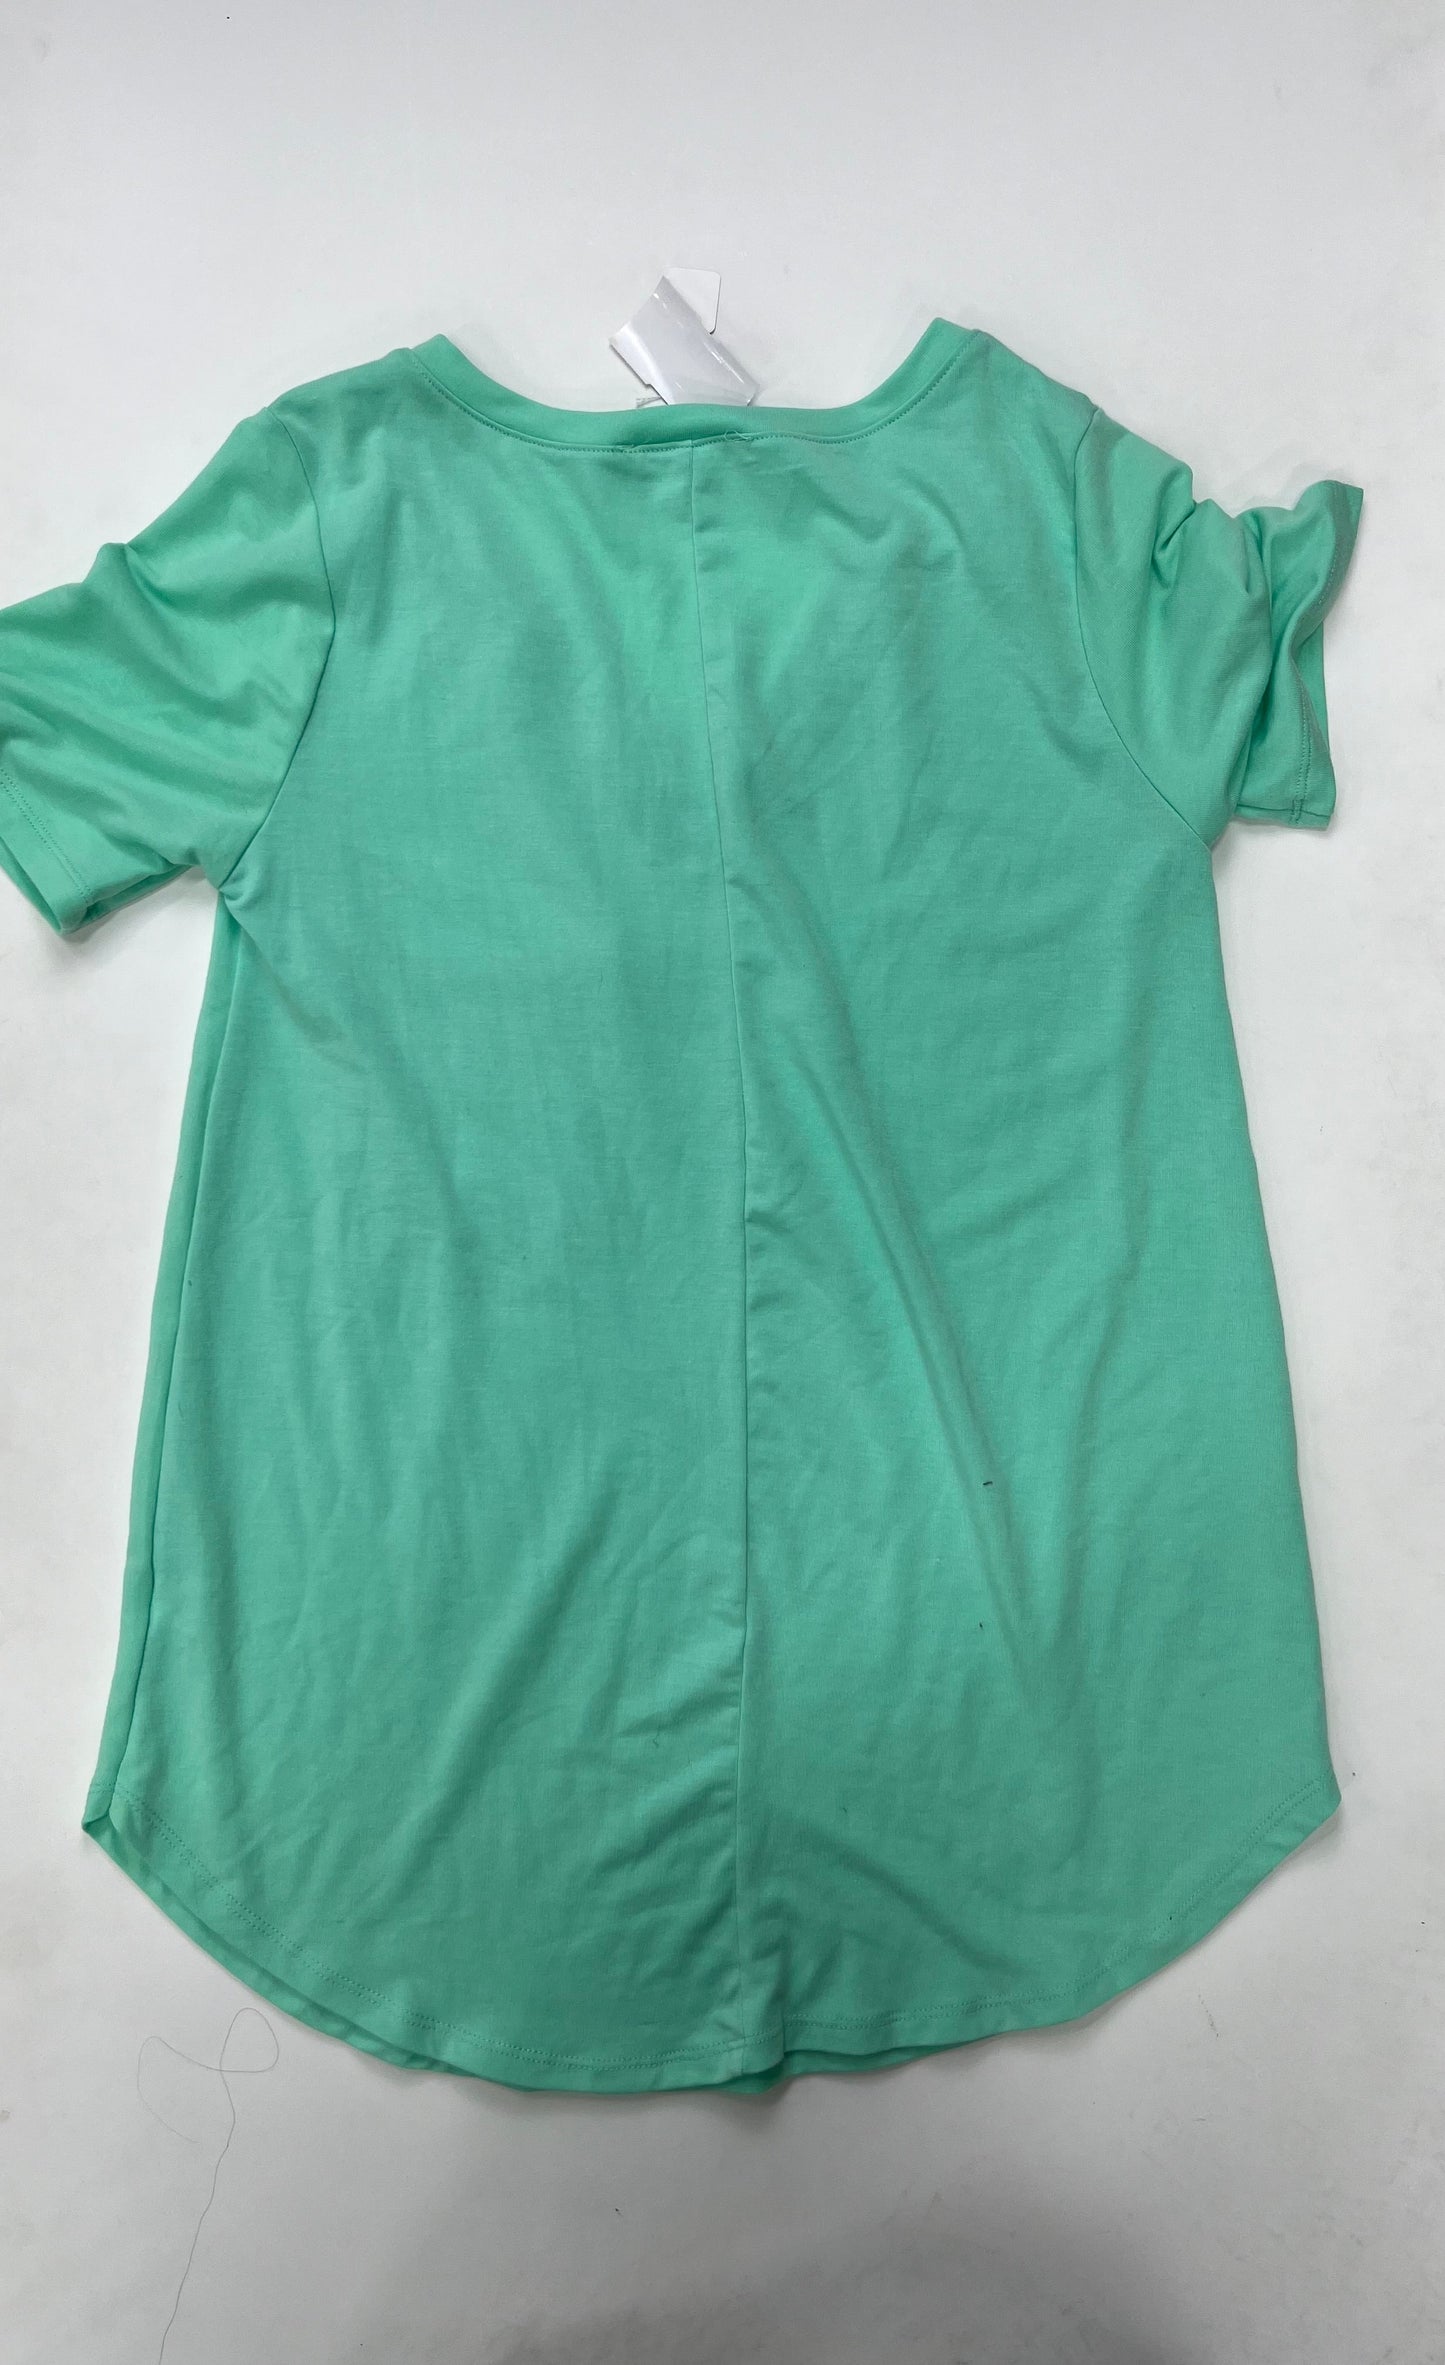 Mint Top Short Sleeve Zenana Outfitters, Size S